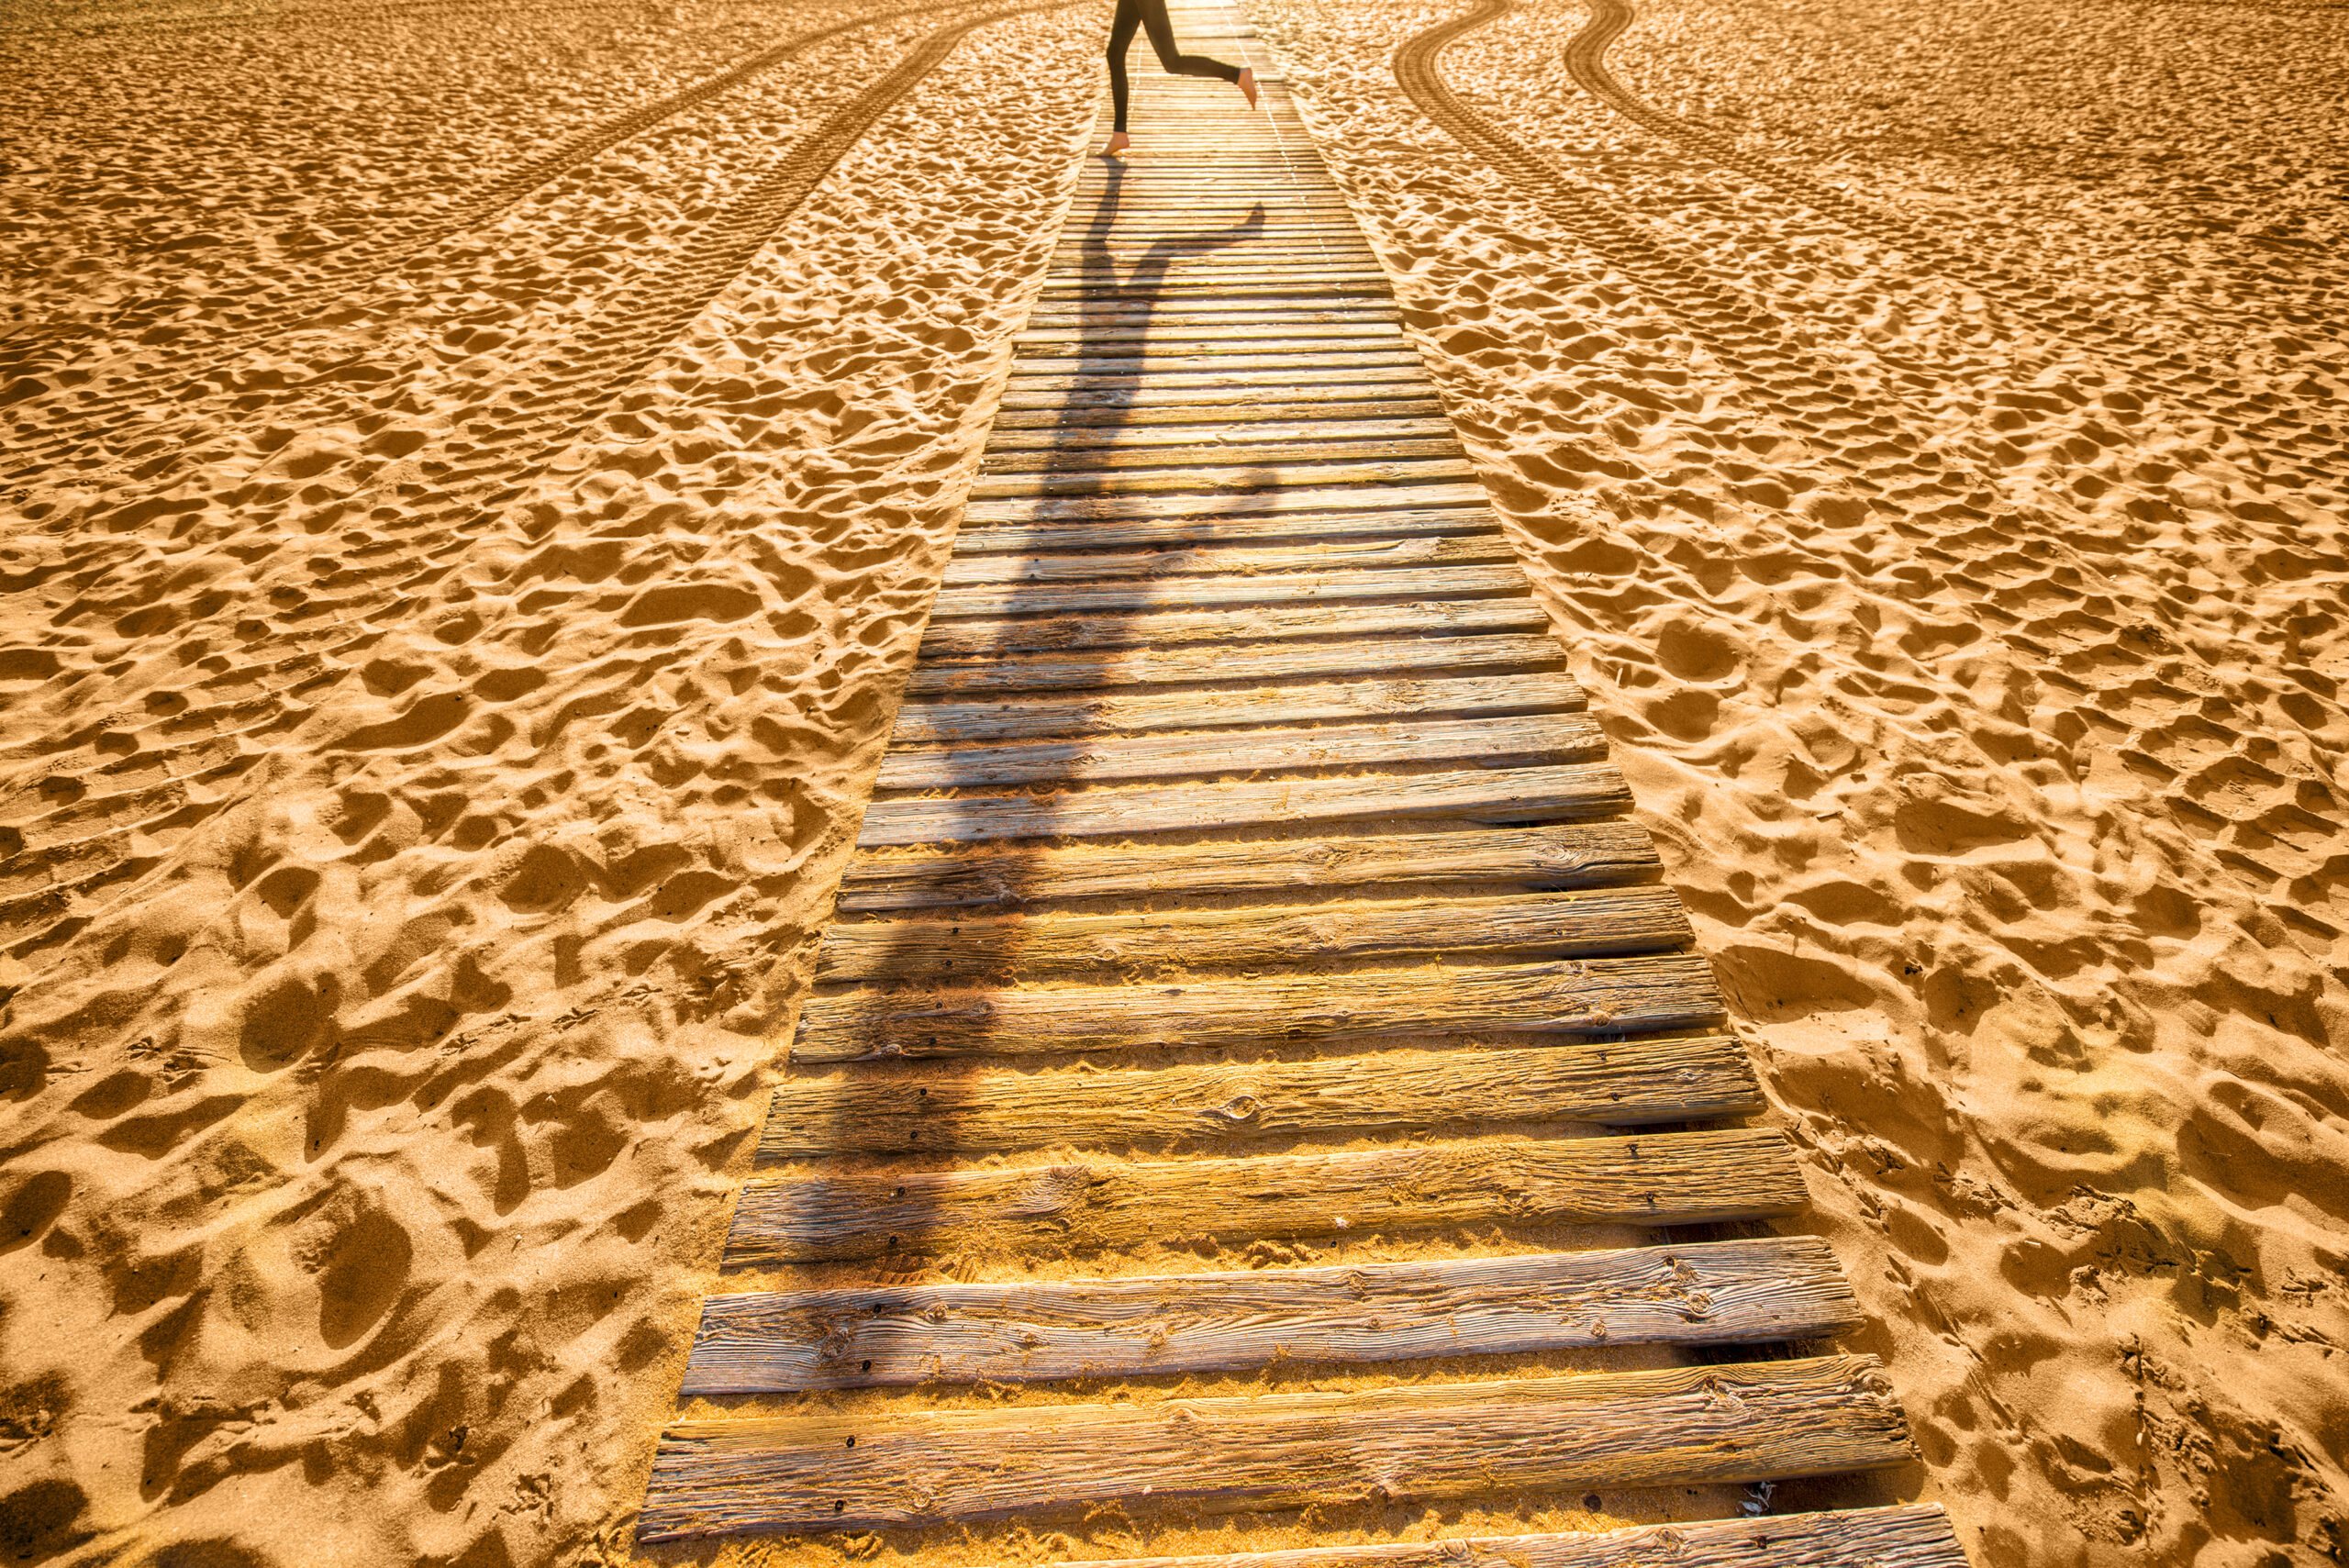 View on sandy beach with wooden footpath and shadow of running woman